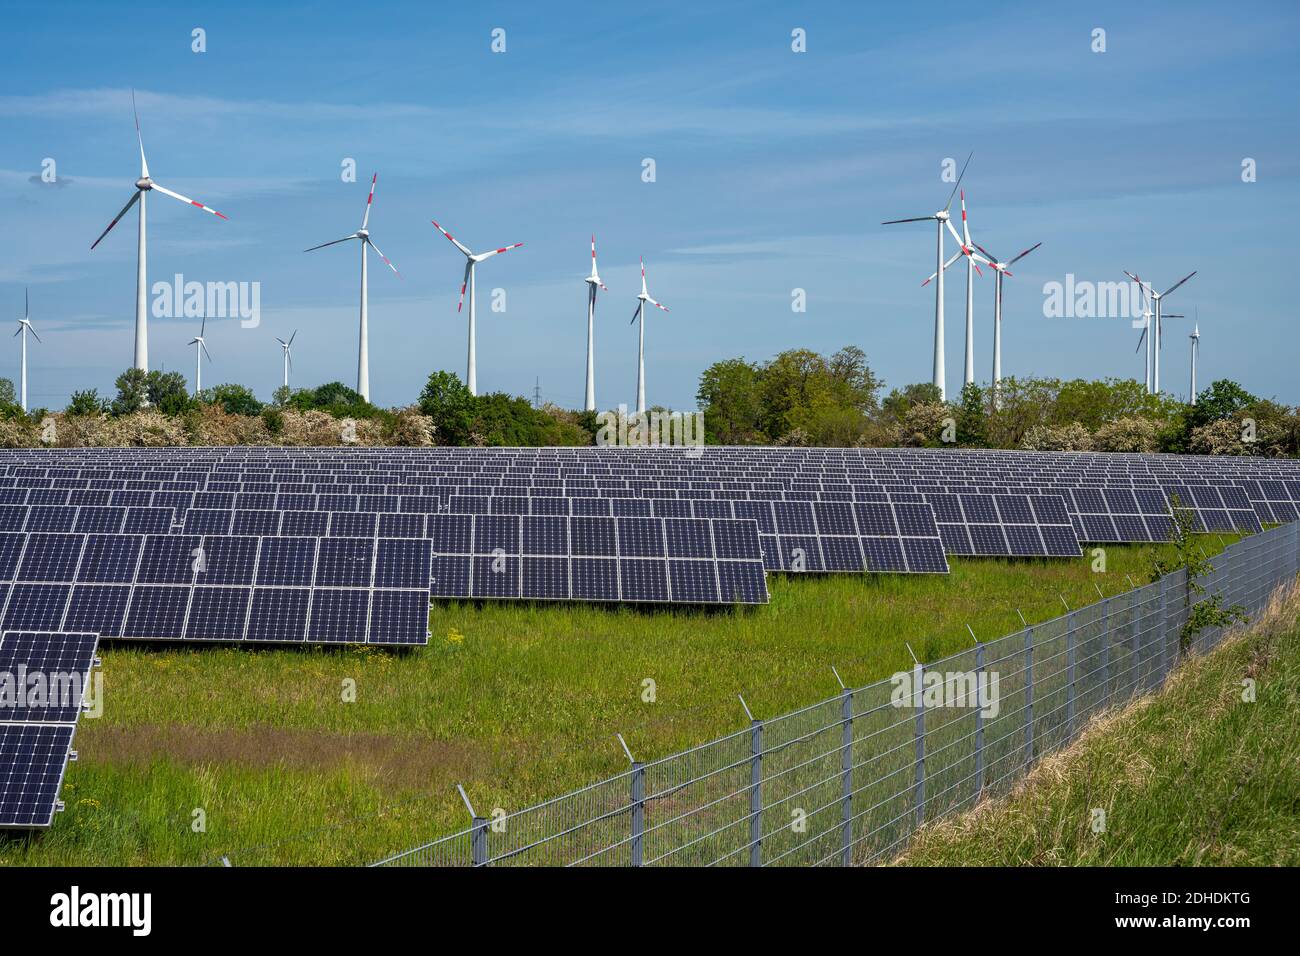 Solar energy panels with wind turbines in the back seen in Germany Stock Photo